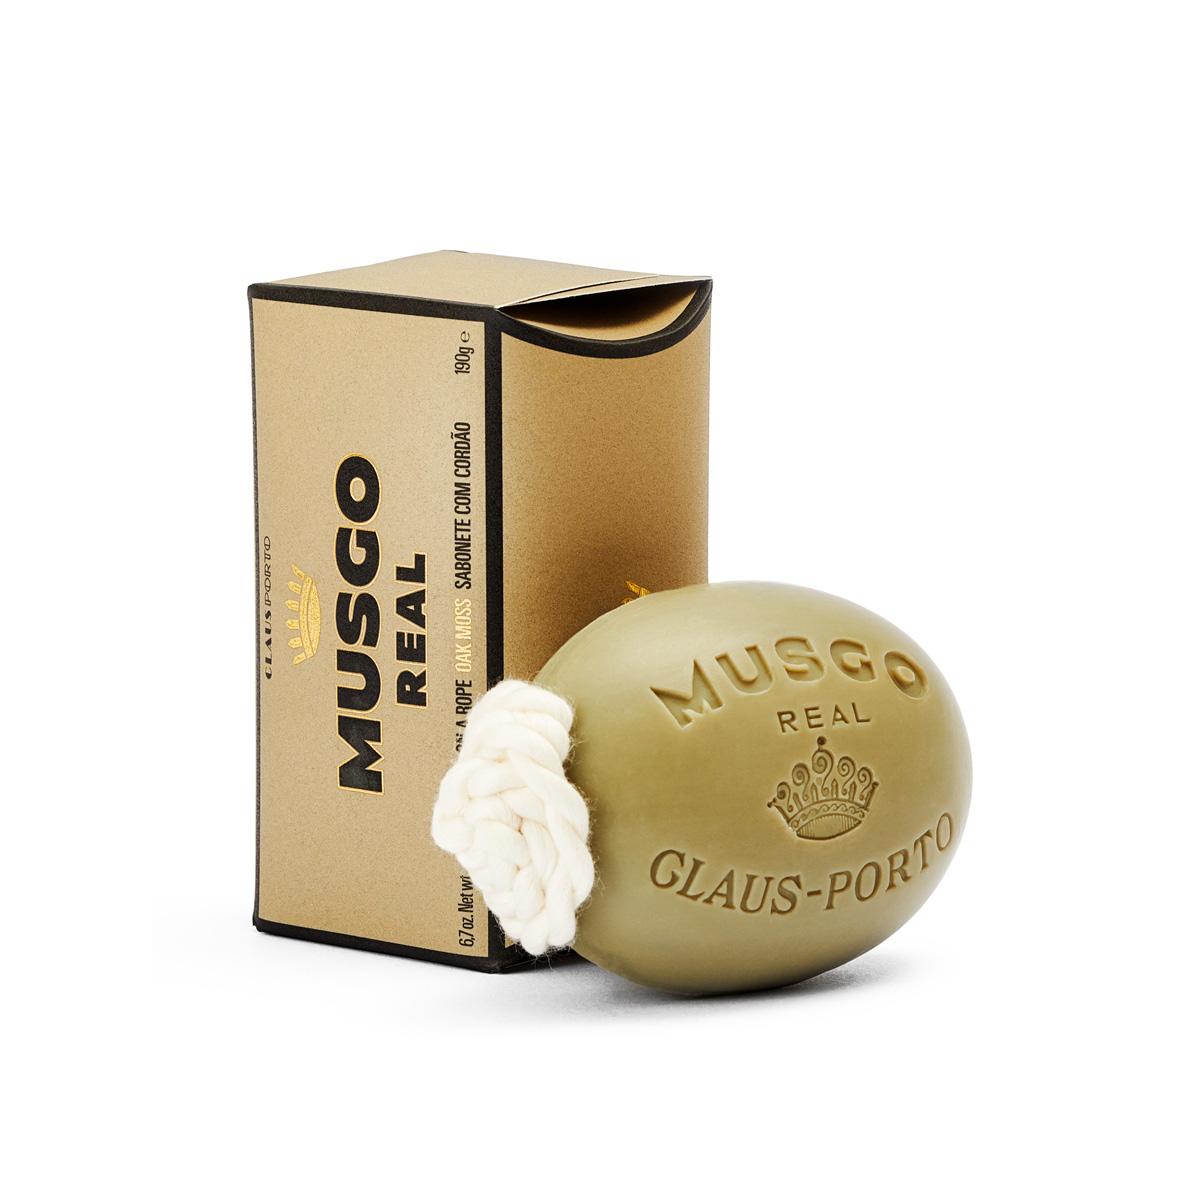 Musgo Real Soap on a Rope Oak Moss 190g